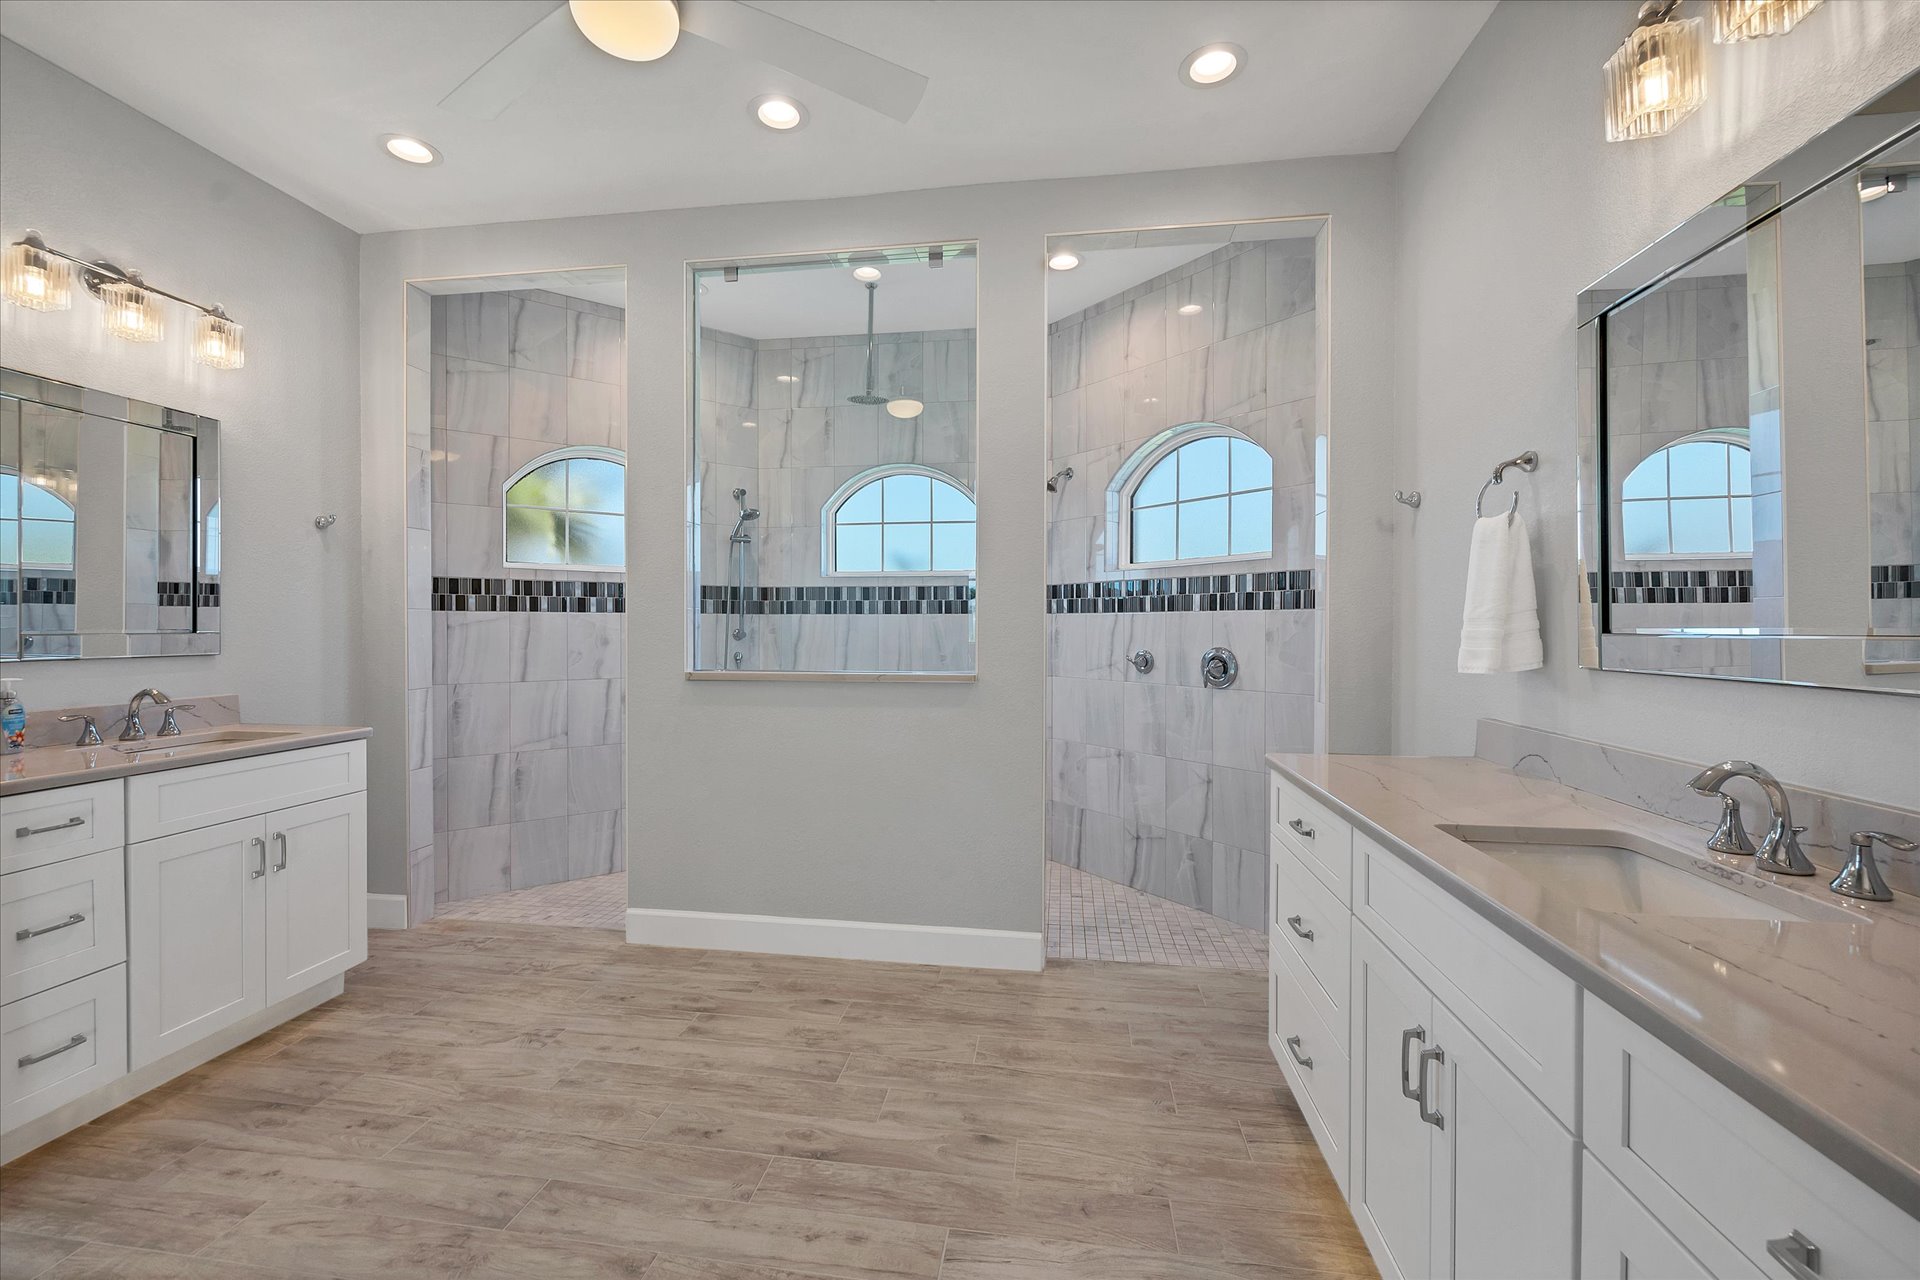 Ensuite with large walk-in shower and double vanities